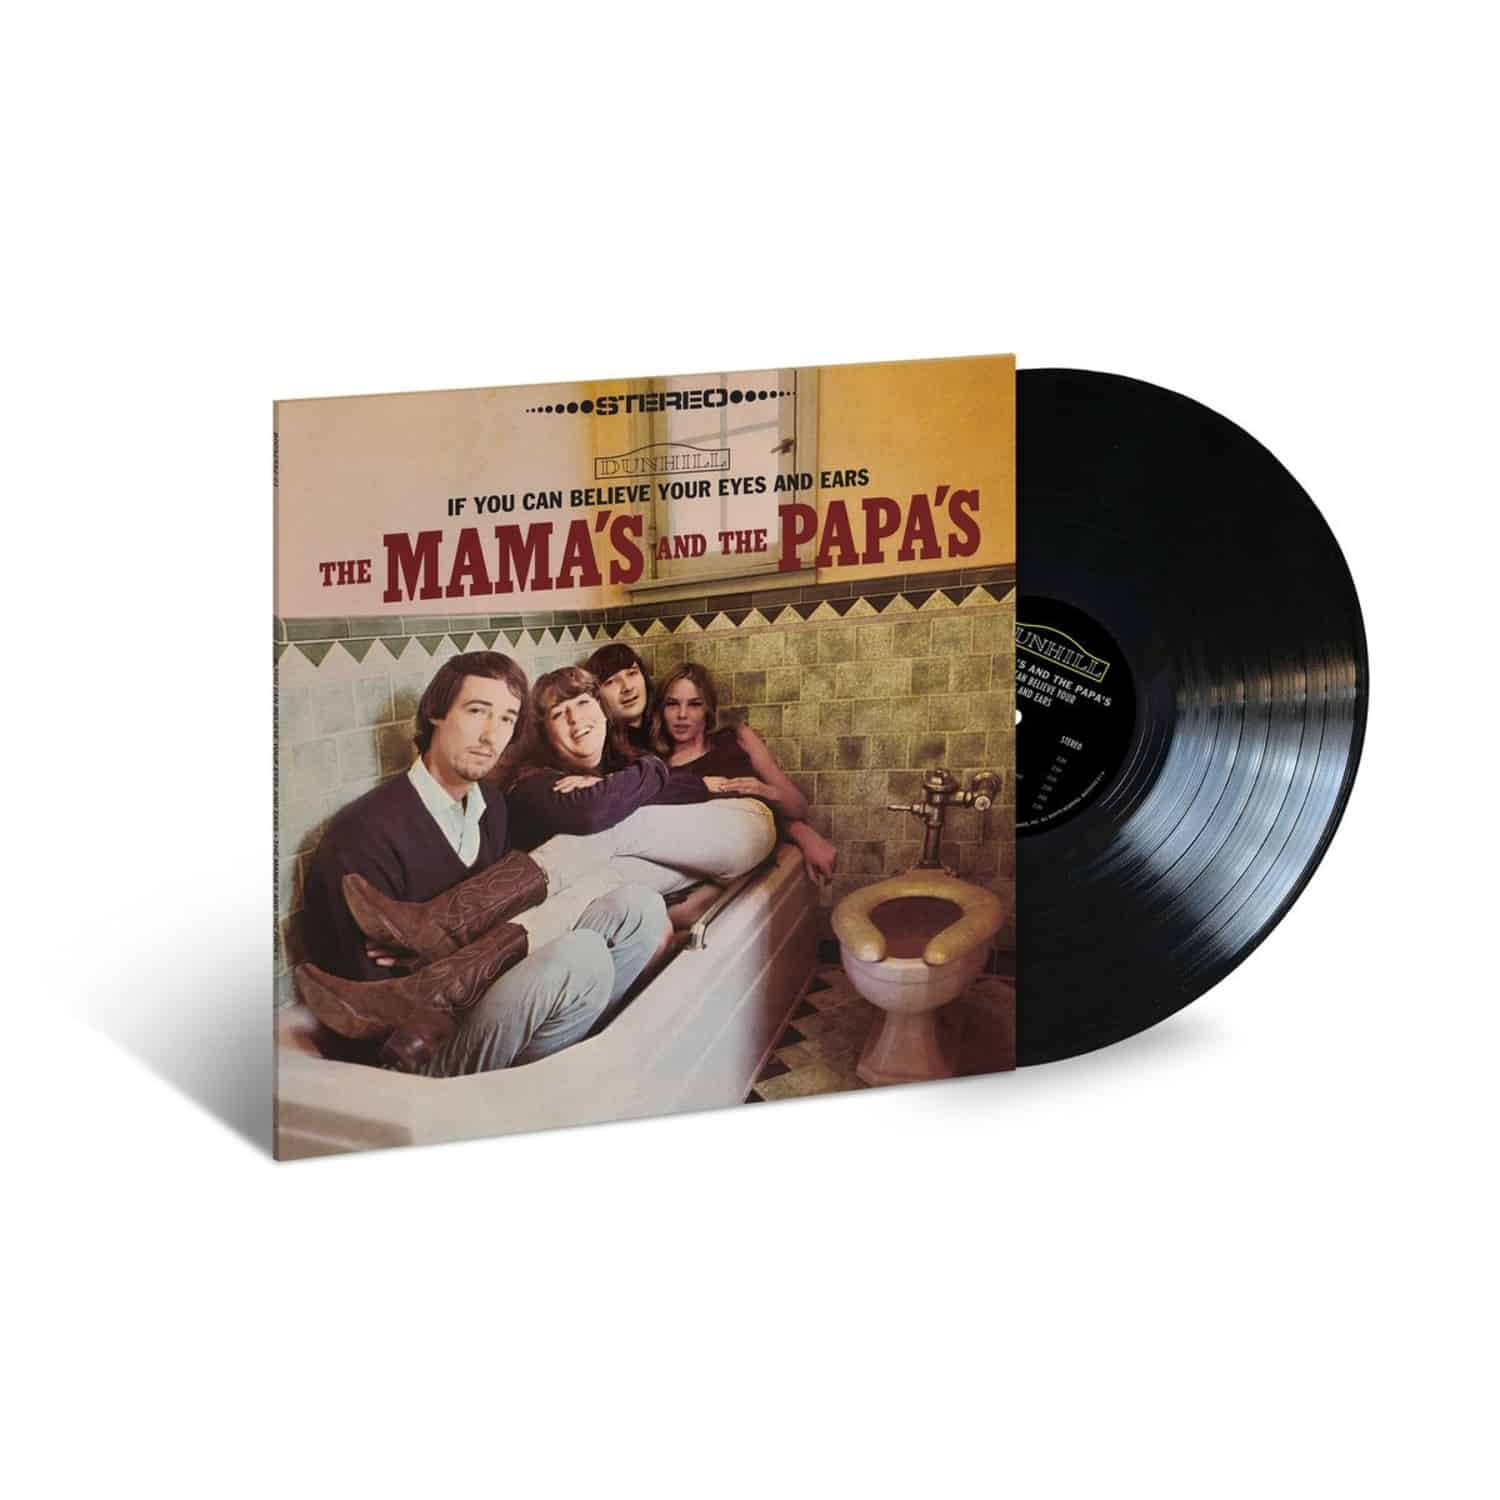 The Mamas & The Papas - IF YOU CAN BELIEVE YOUR EYES AND EARS 